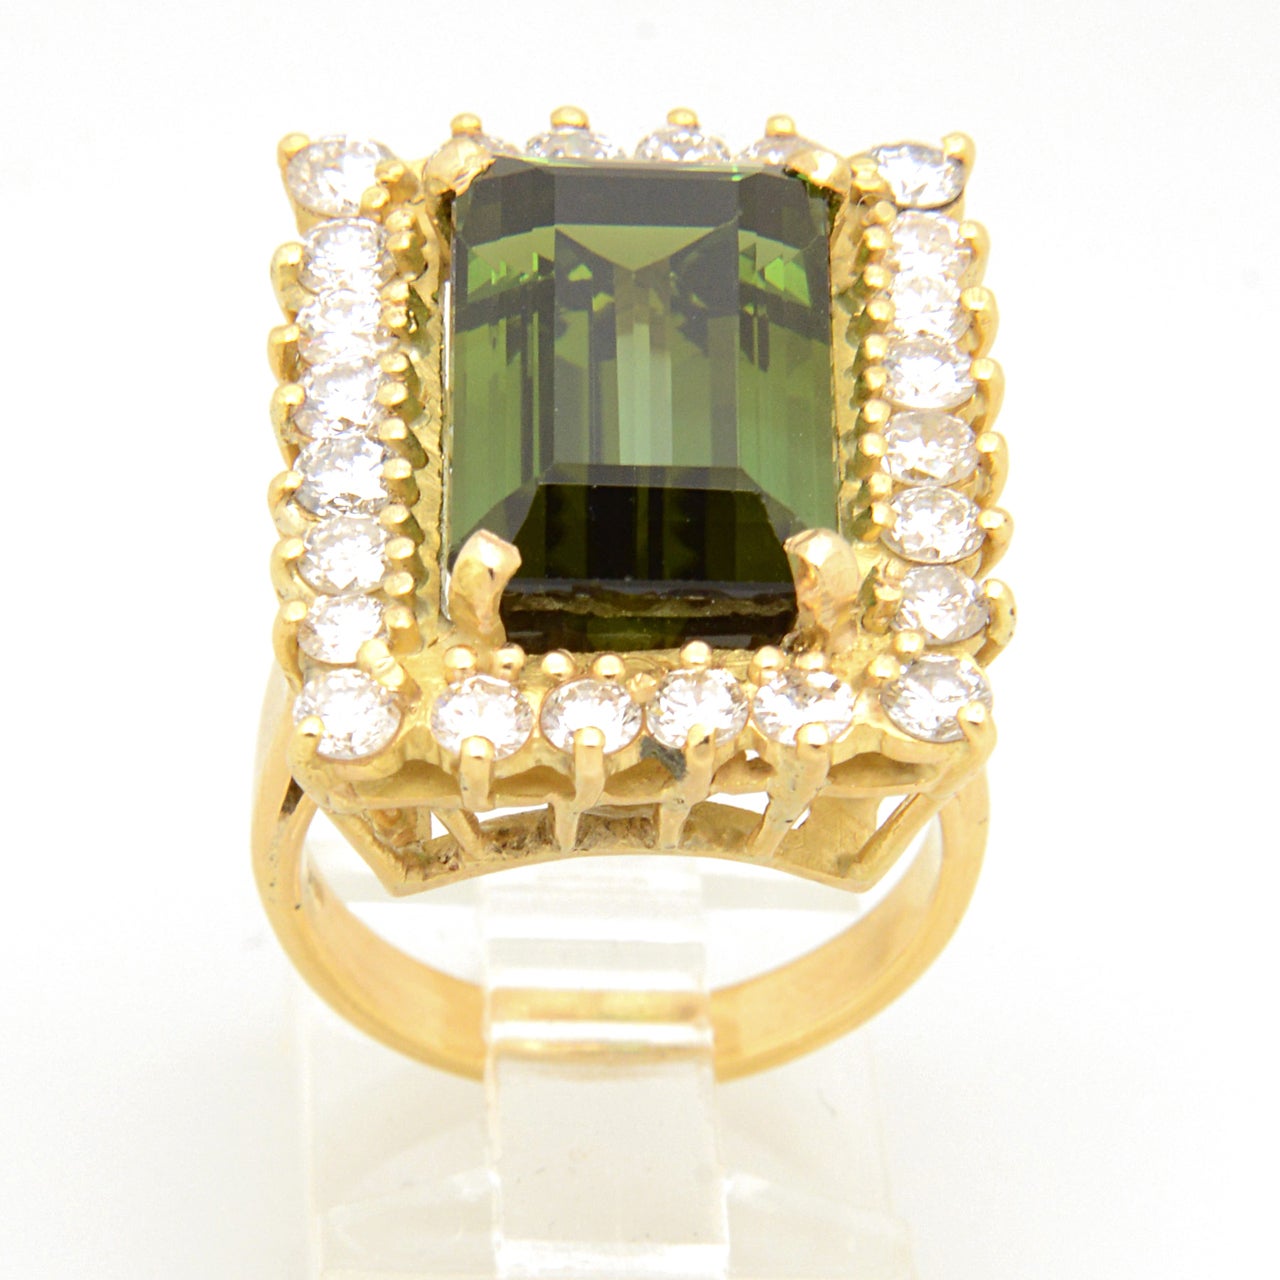 Truly elegant ring featuring an emerald cut green facetted tourmaline prong set amidst a diamond frame.  The frame contains approximately 1.95 carats of diamonds.
It is a US ring size of 6.5 which can be sized.